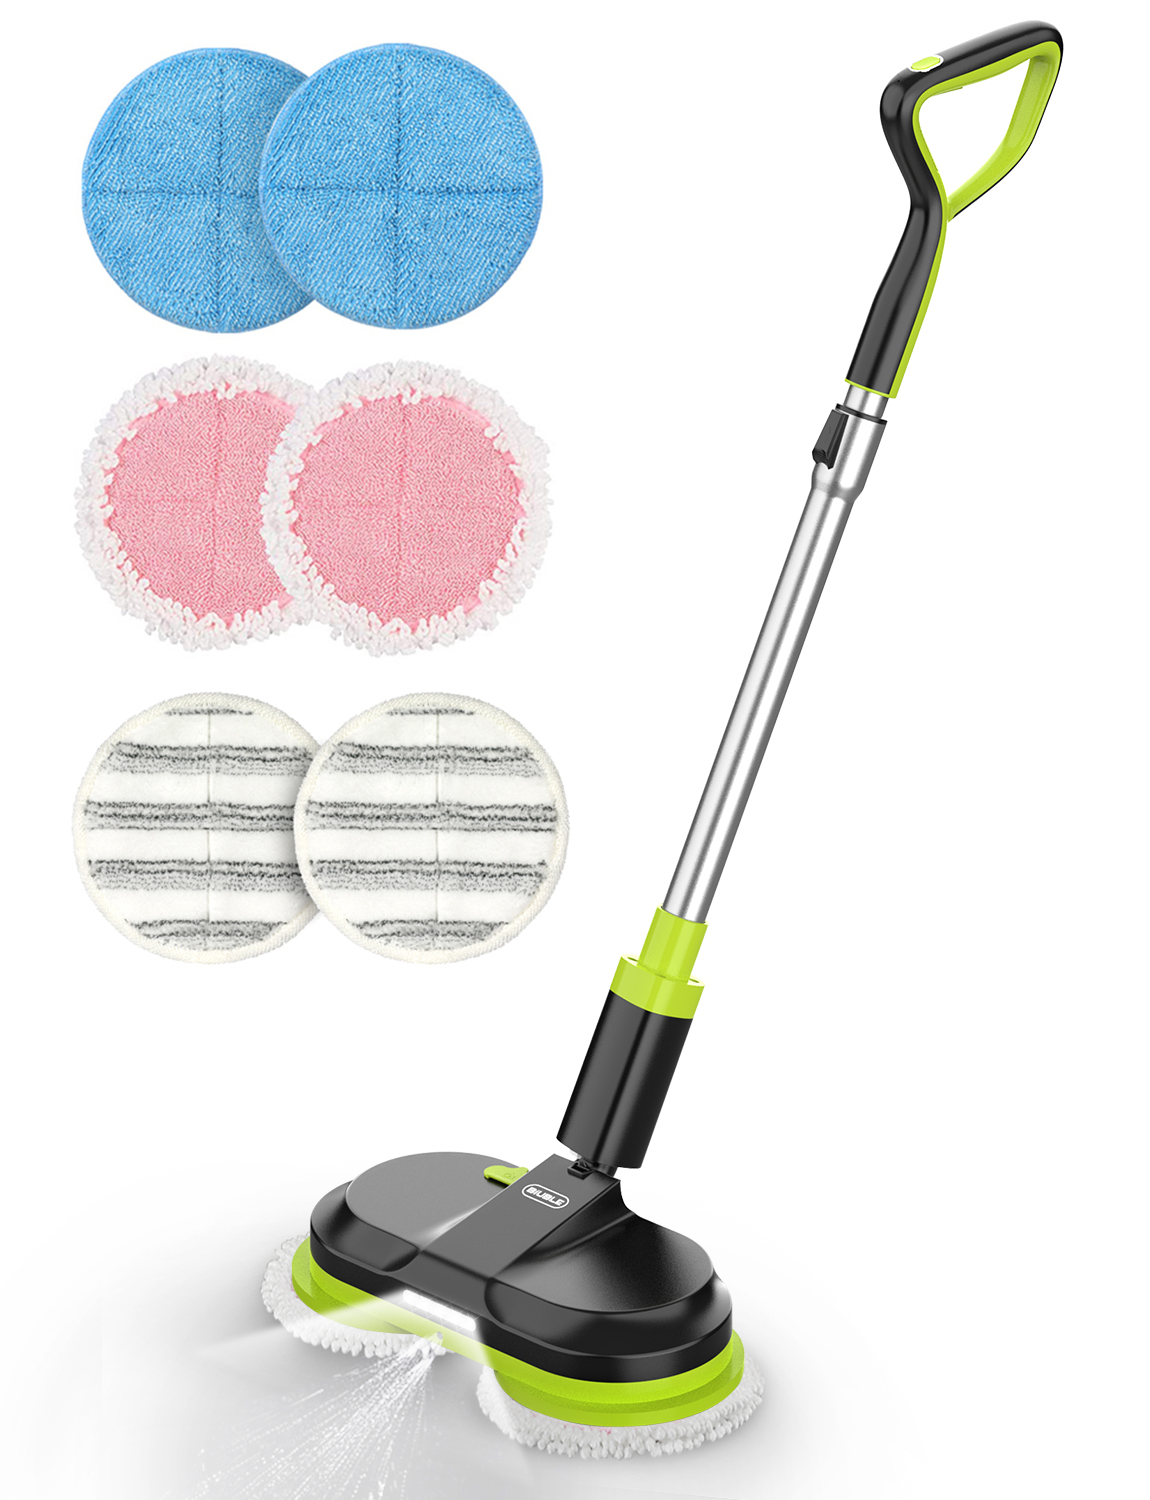  BIUBLE Cordless Electric Mop, Dual Spin Mops for Floor Cleaning,  LED Headlight / Stand-Free / Water Sprayer, Rechargeable Scrubber Cleaner  Mops with 300ML Water Tank for Multi Floors, Self-Propelled : Health